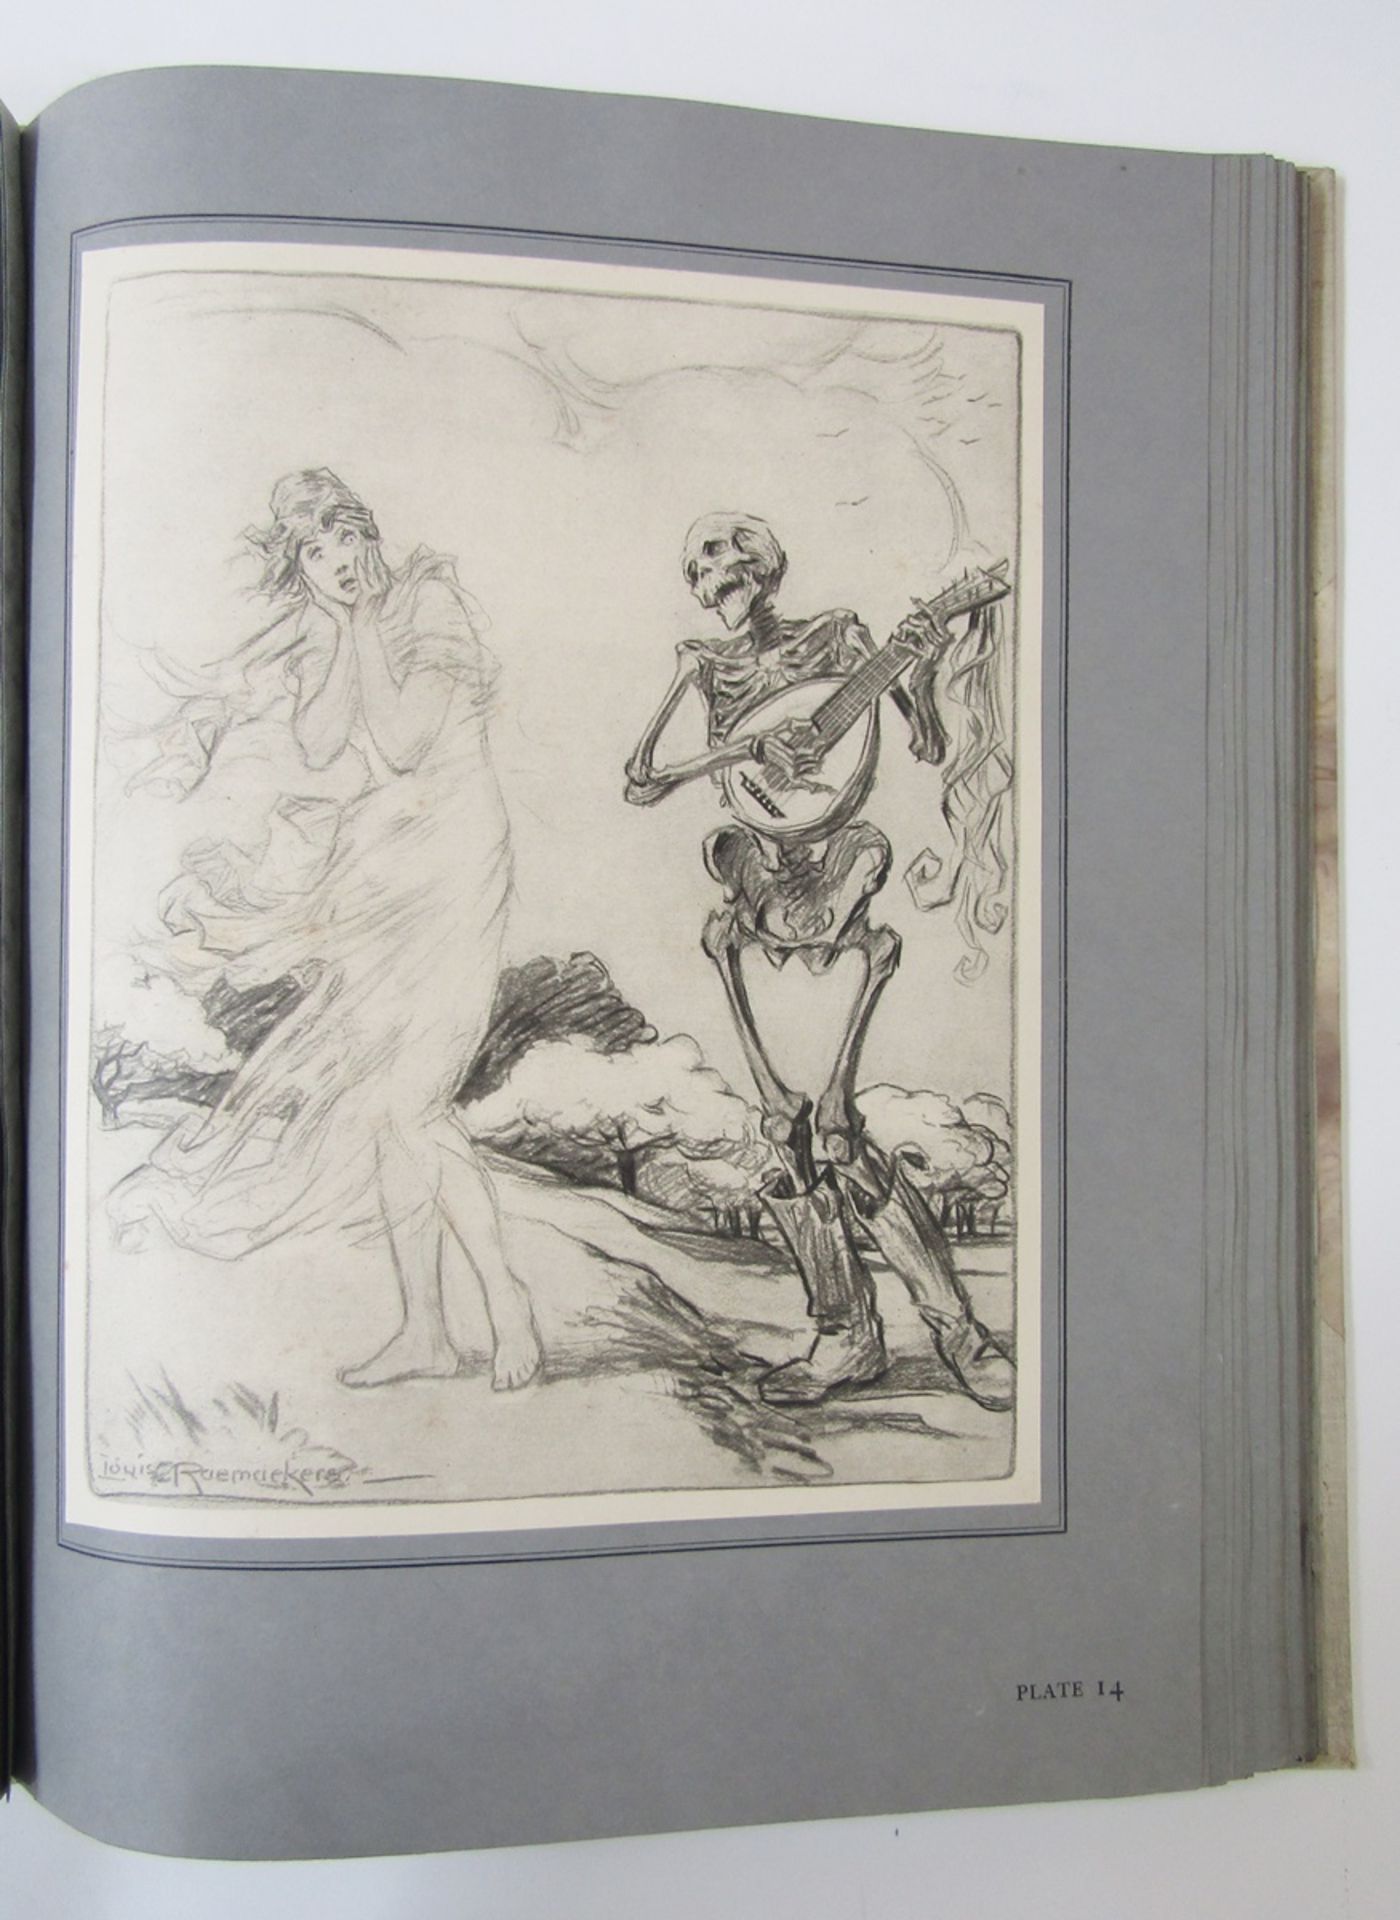 Raemaekers, Louis. (ills.) "The Great War in 1916 - A Neutral's Indictment" The Fine Art Society - Image 11 of 26